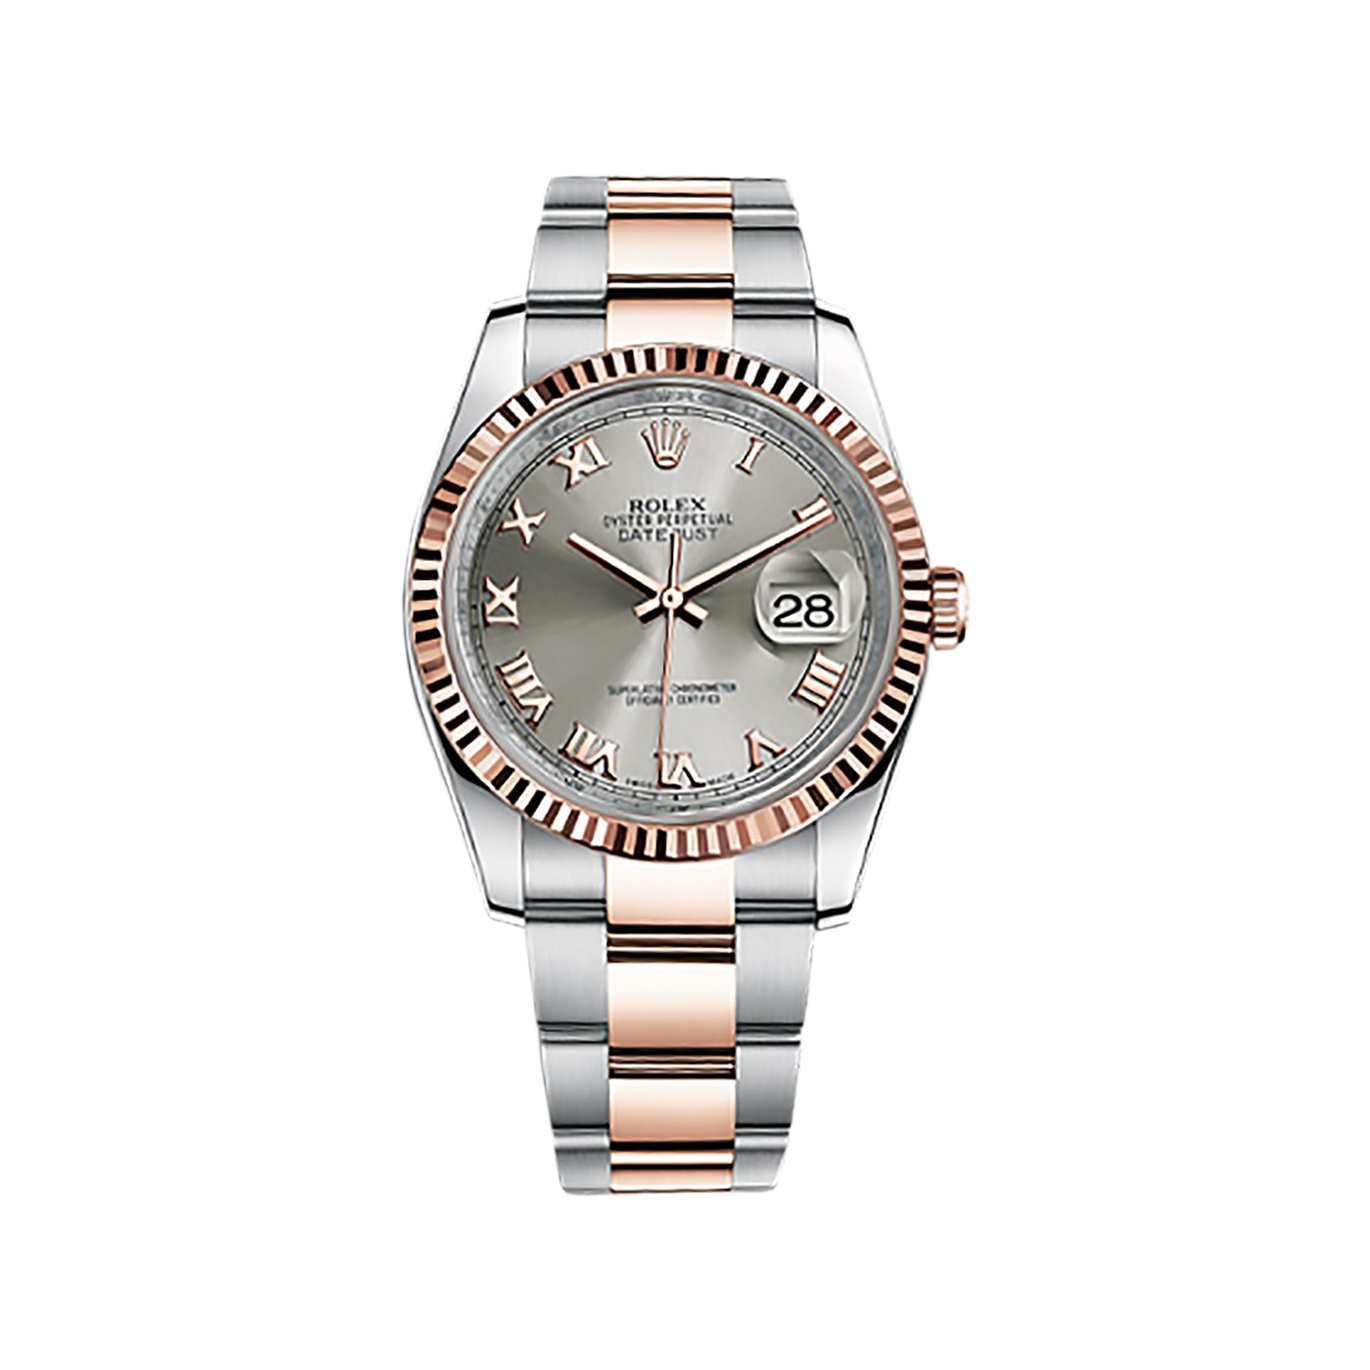 Datejust 36 116231 Rose Gold & Stainless Steel Watch (Steel)